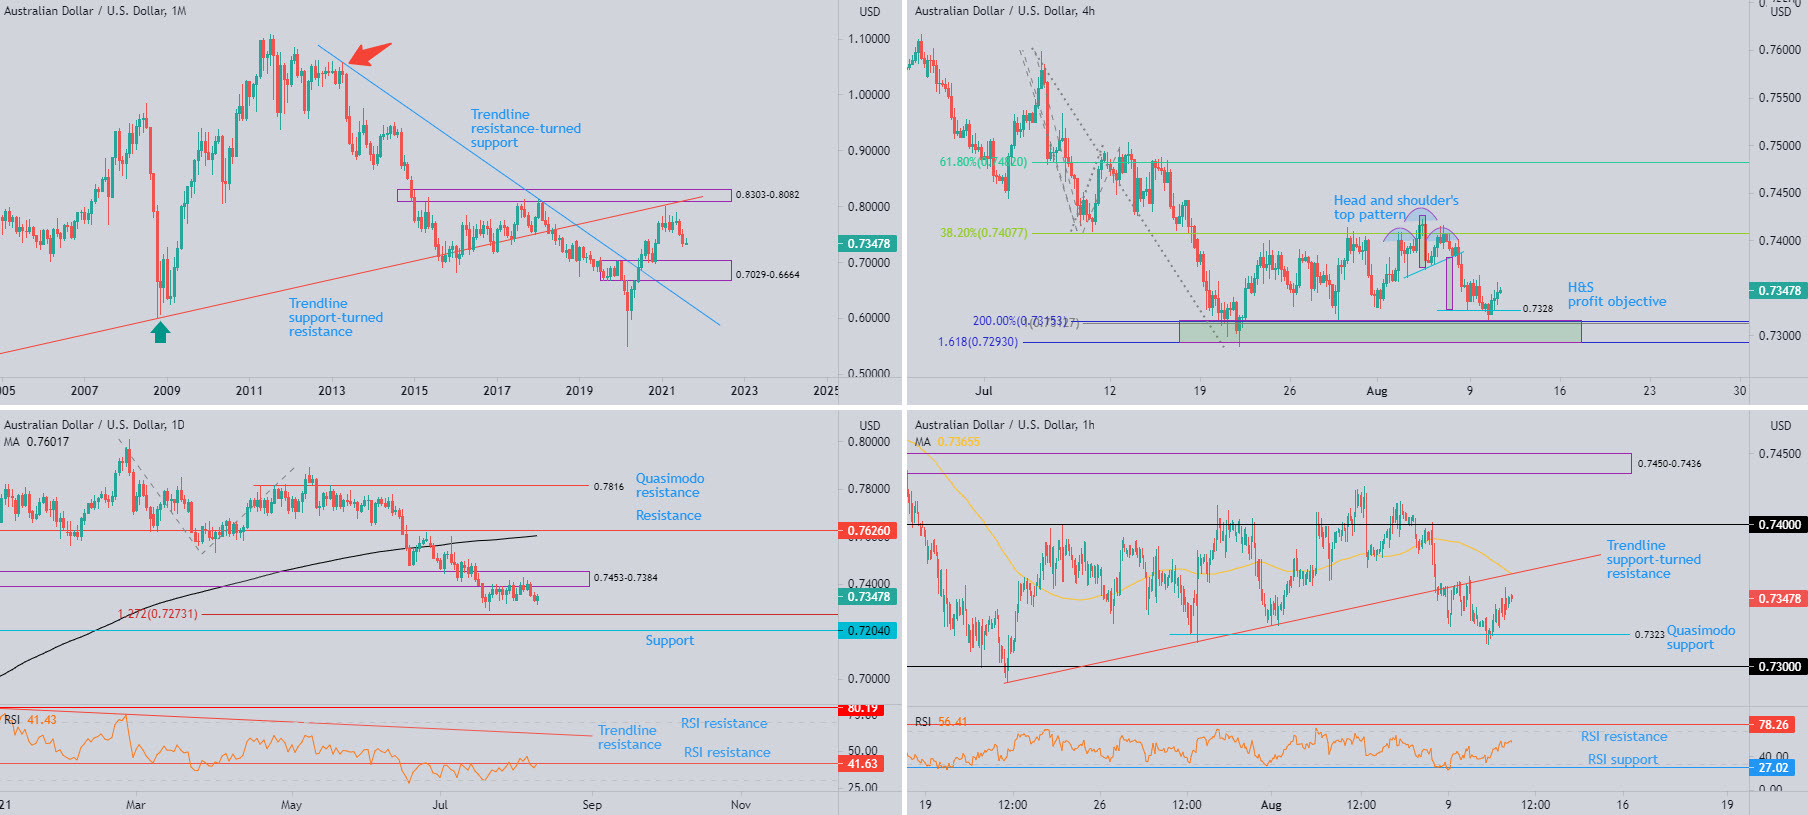 August 12th 2021: AUD/USD Daily Resistance at $0.7453-0.7384 Remains a Key Watch, FP Markets